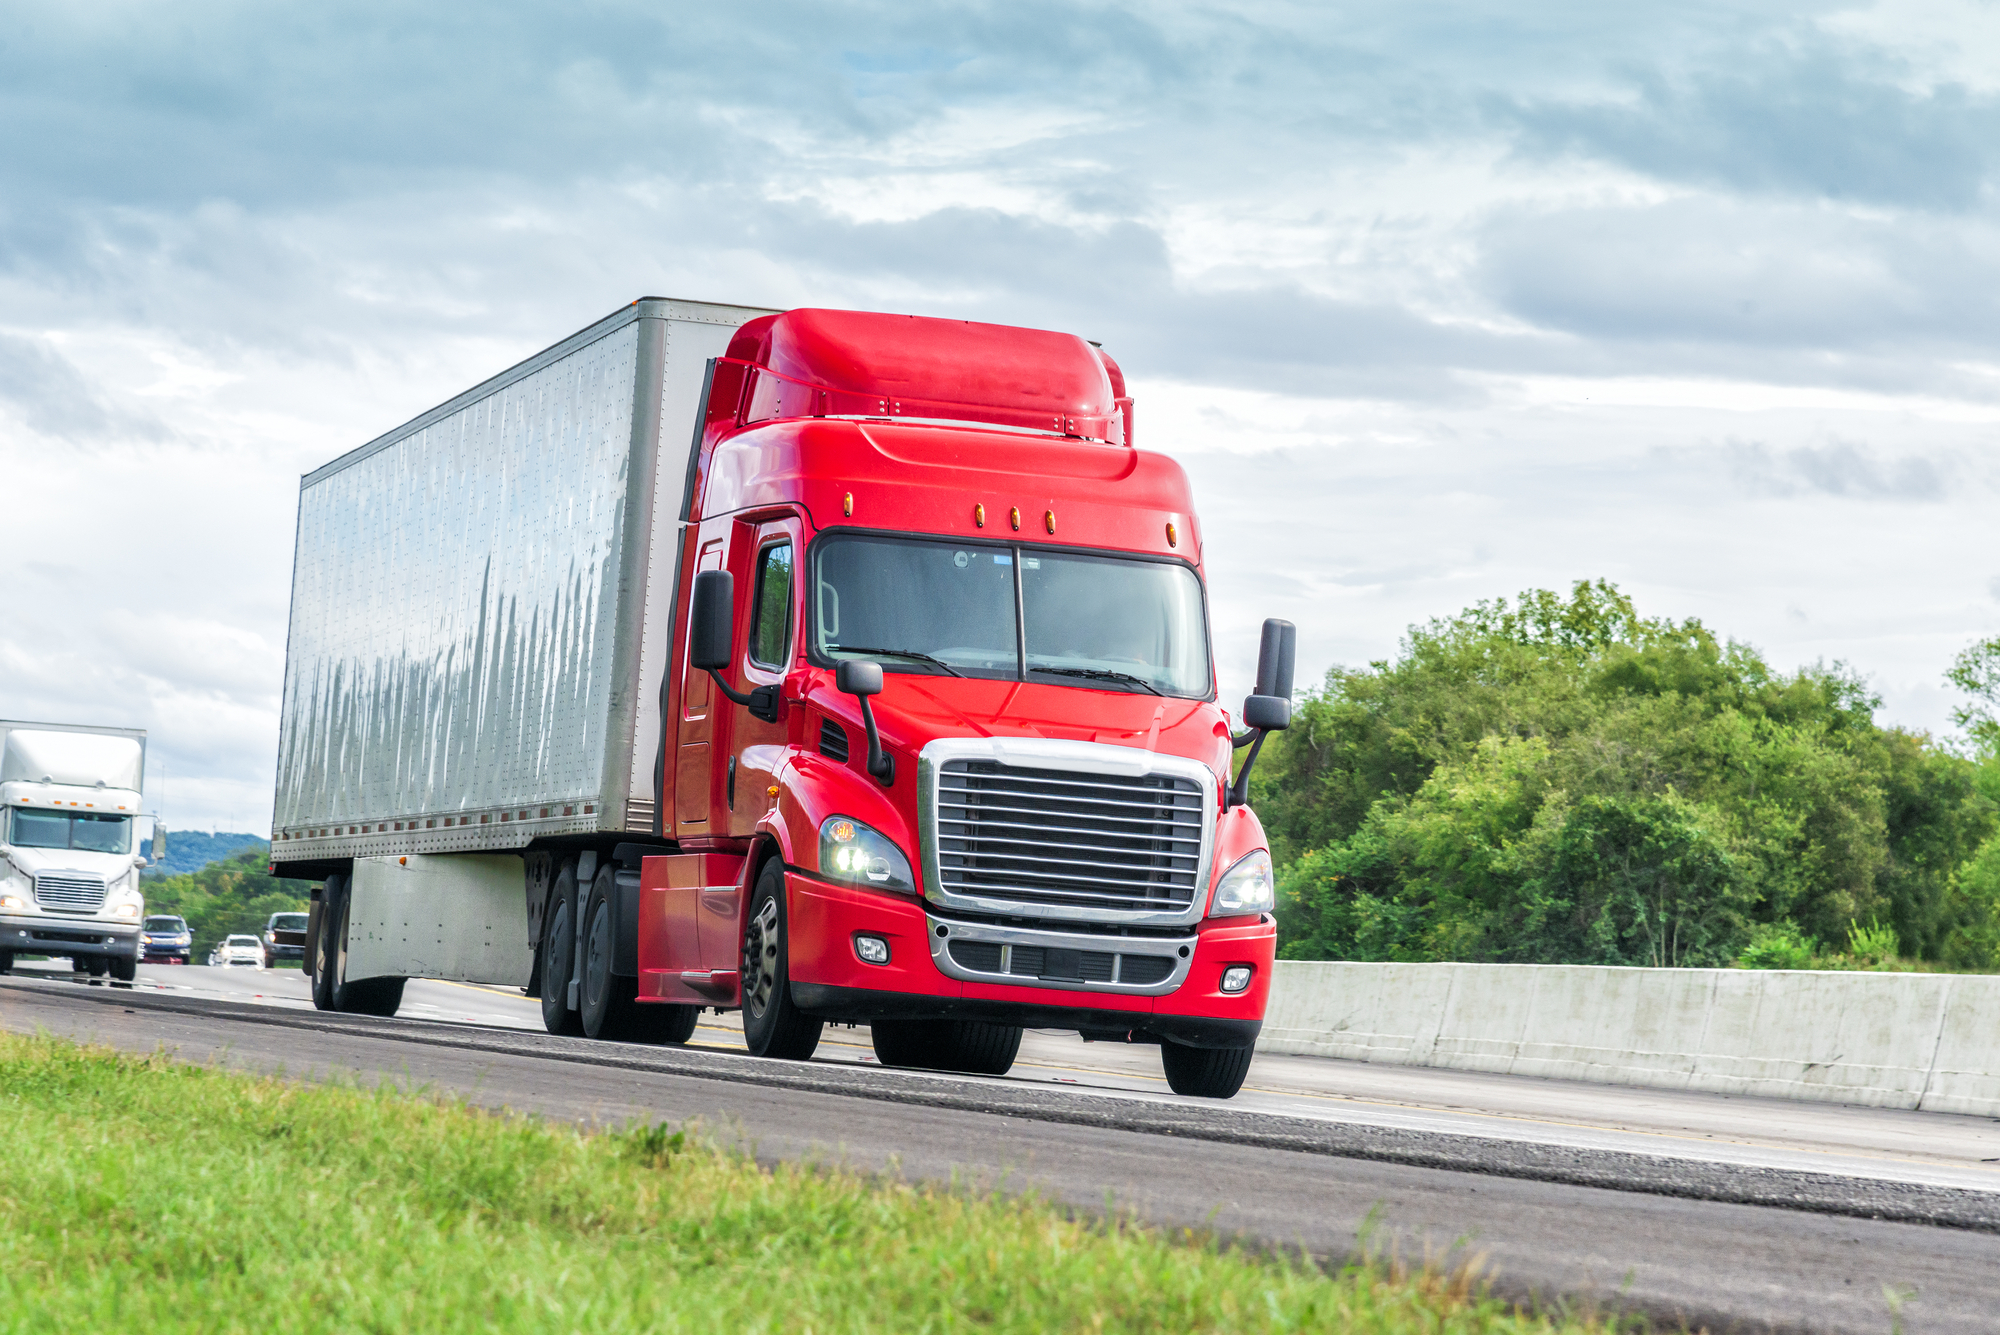 Common Questions After A Truck Accident - Red Eighteen Wheeler Travels Interstate Highway